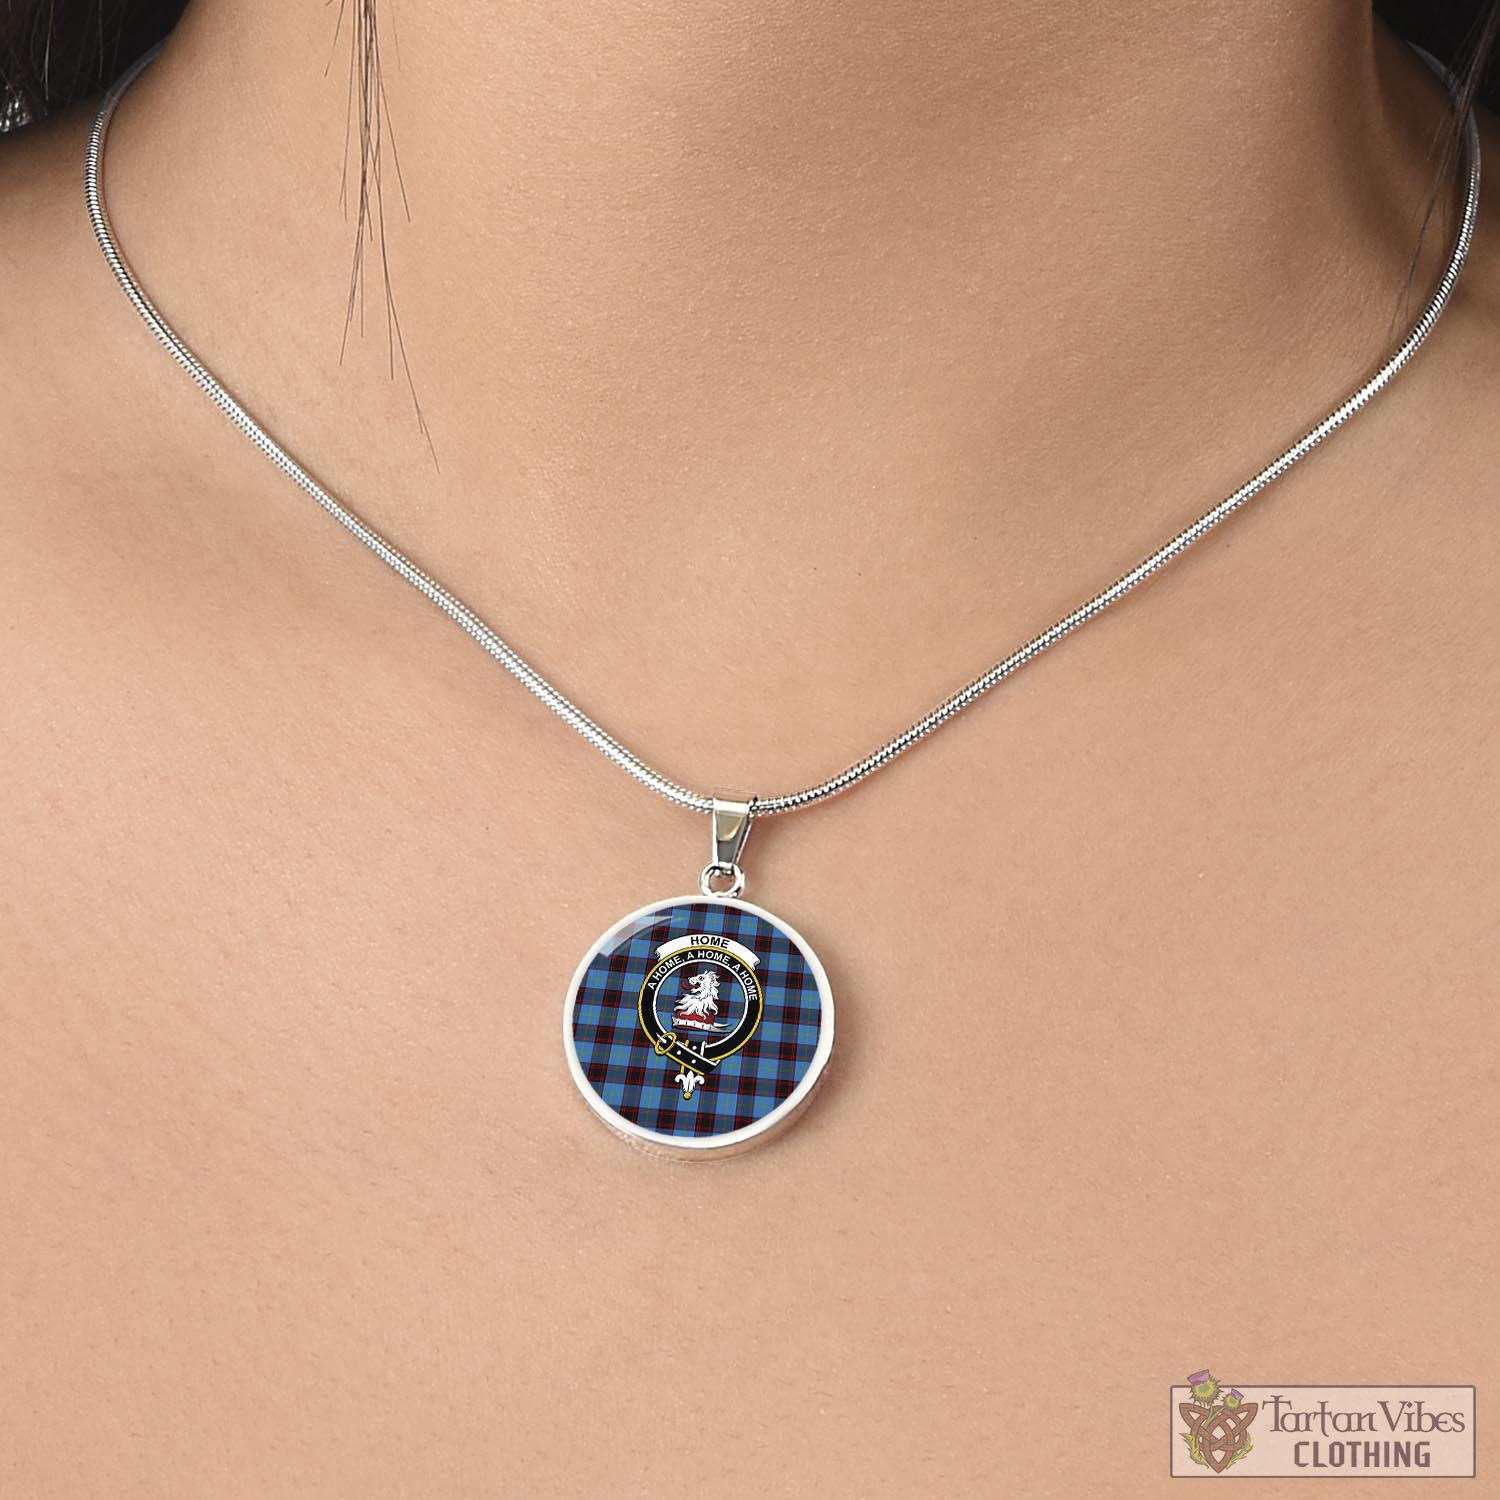 Tartan Vibes Clothing Home Ancient Tartan Circle Necklace with Family Crest